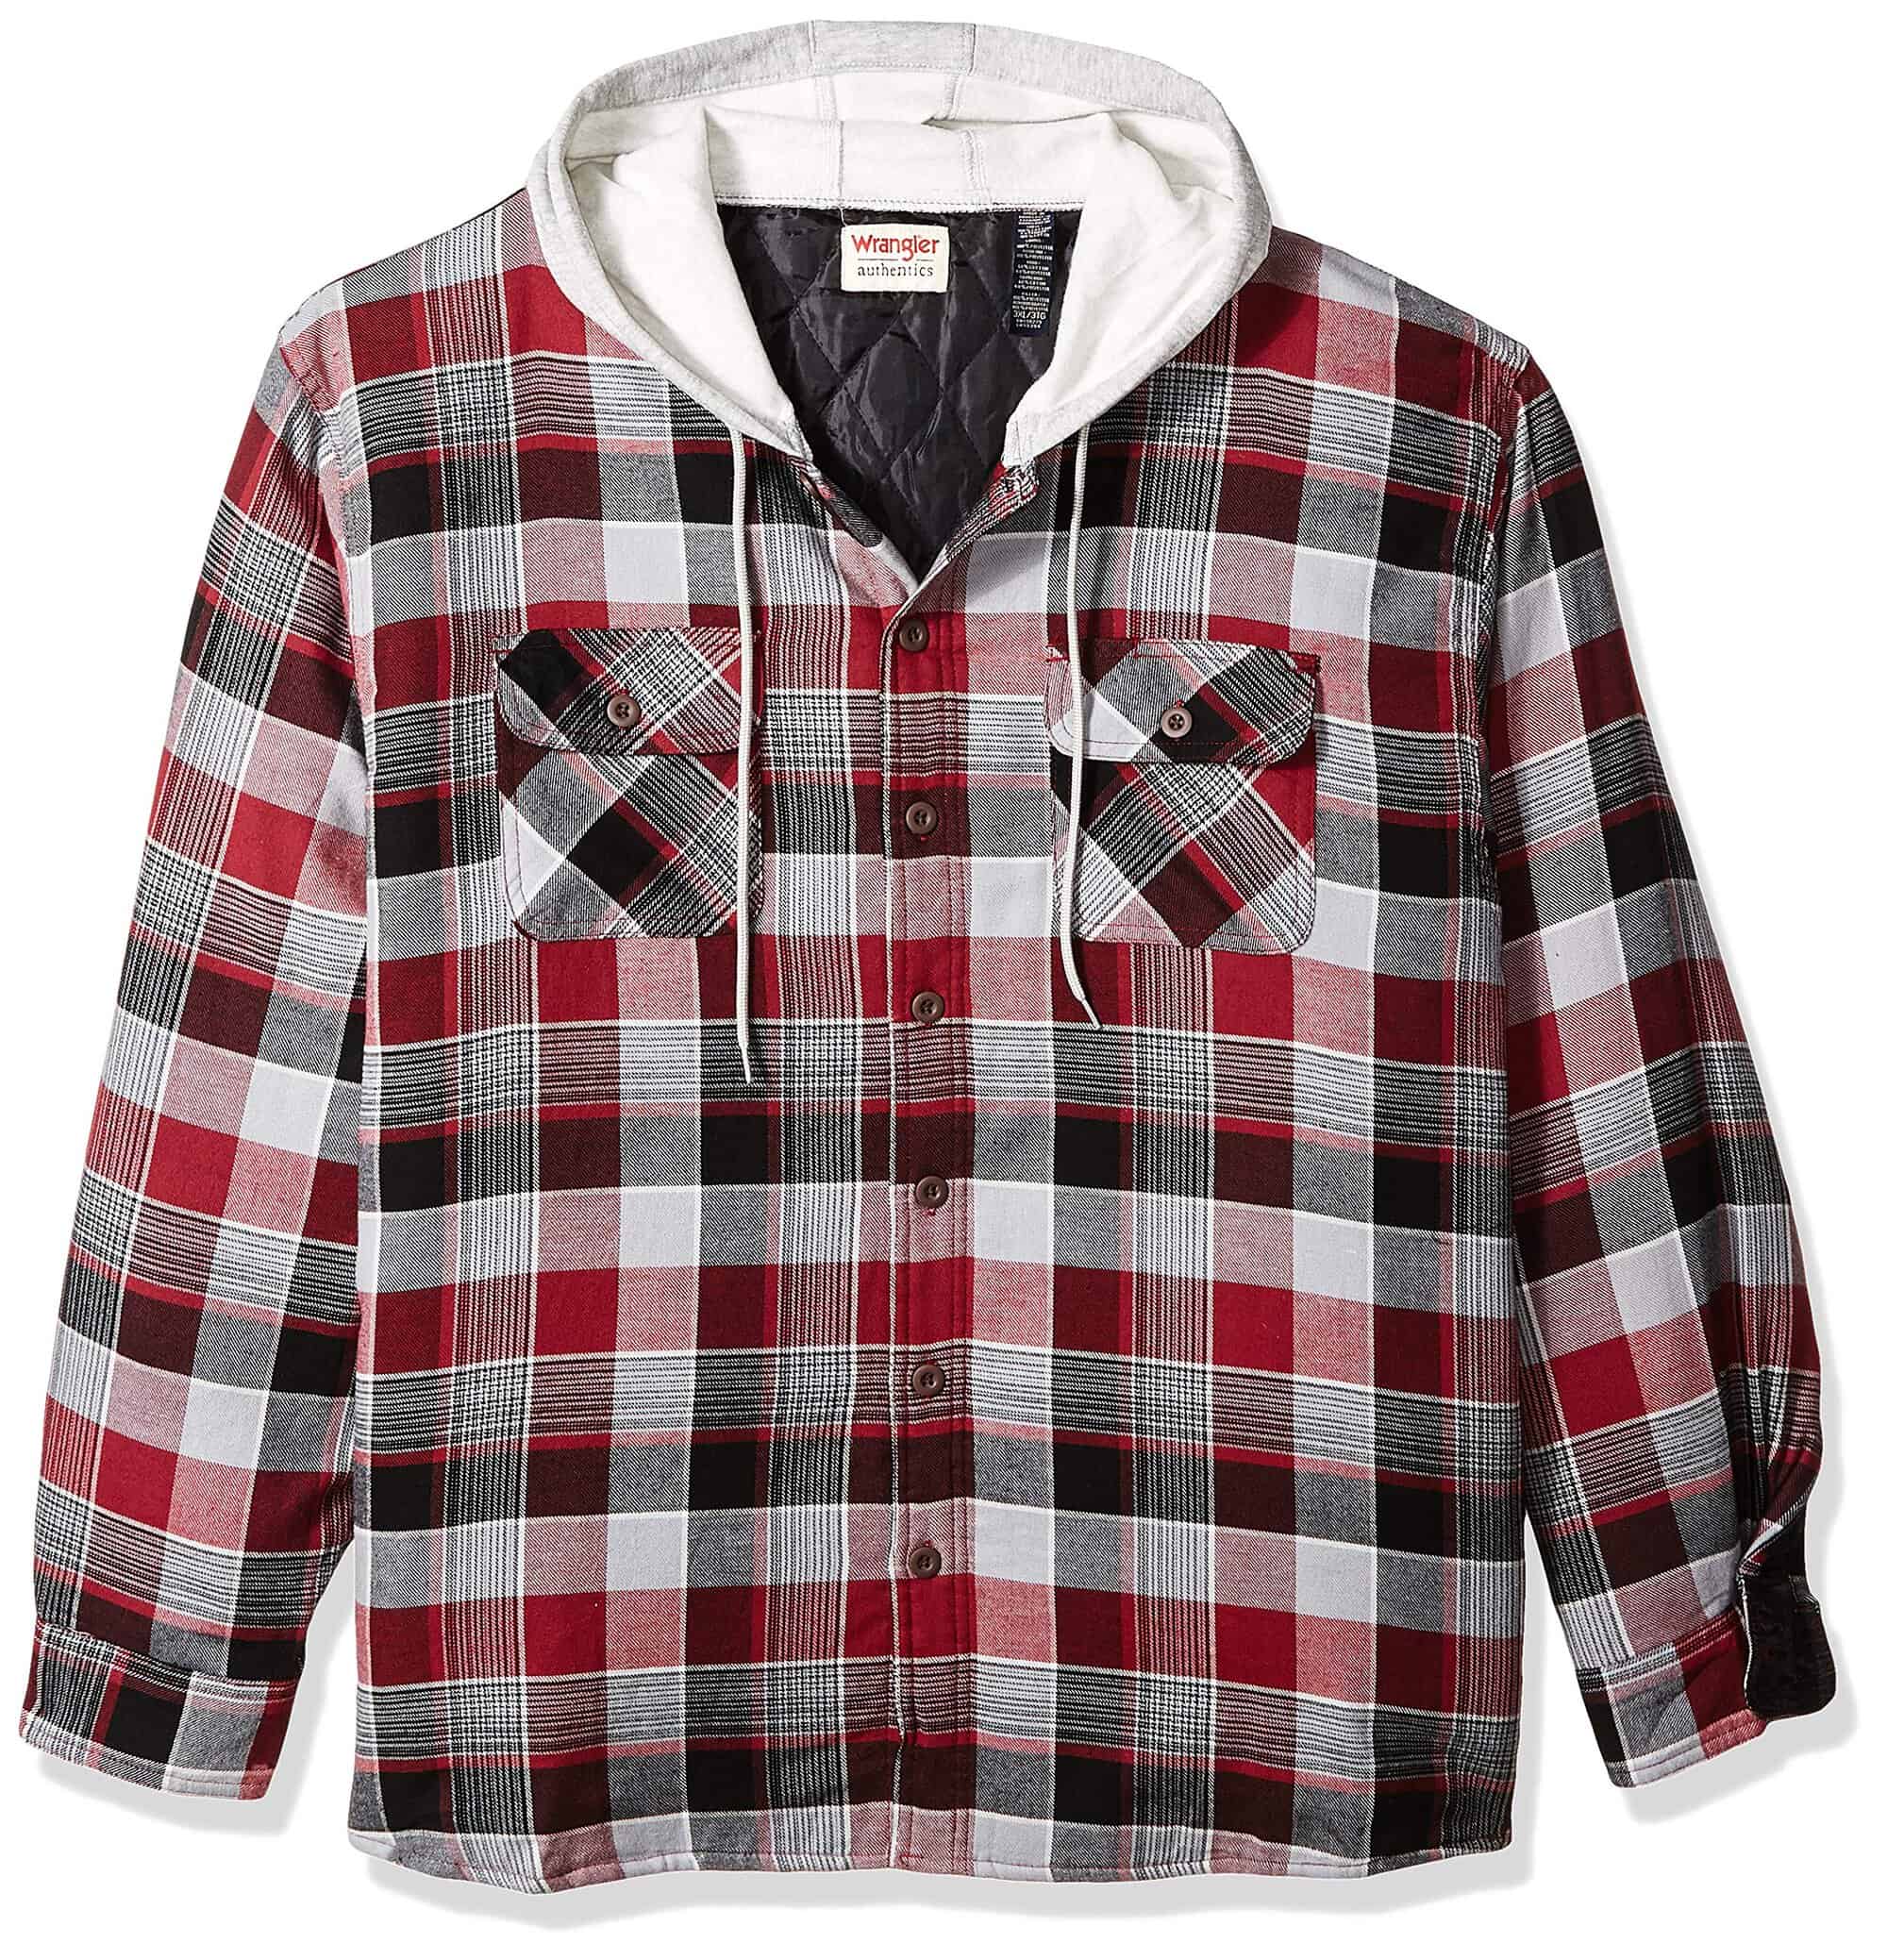 Wrangler Authentics Men's Long Sleeve Quilted Lined Flannel Shirt Jacket with Hood X-Large Biking Red.